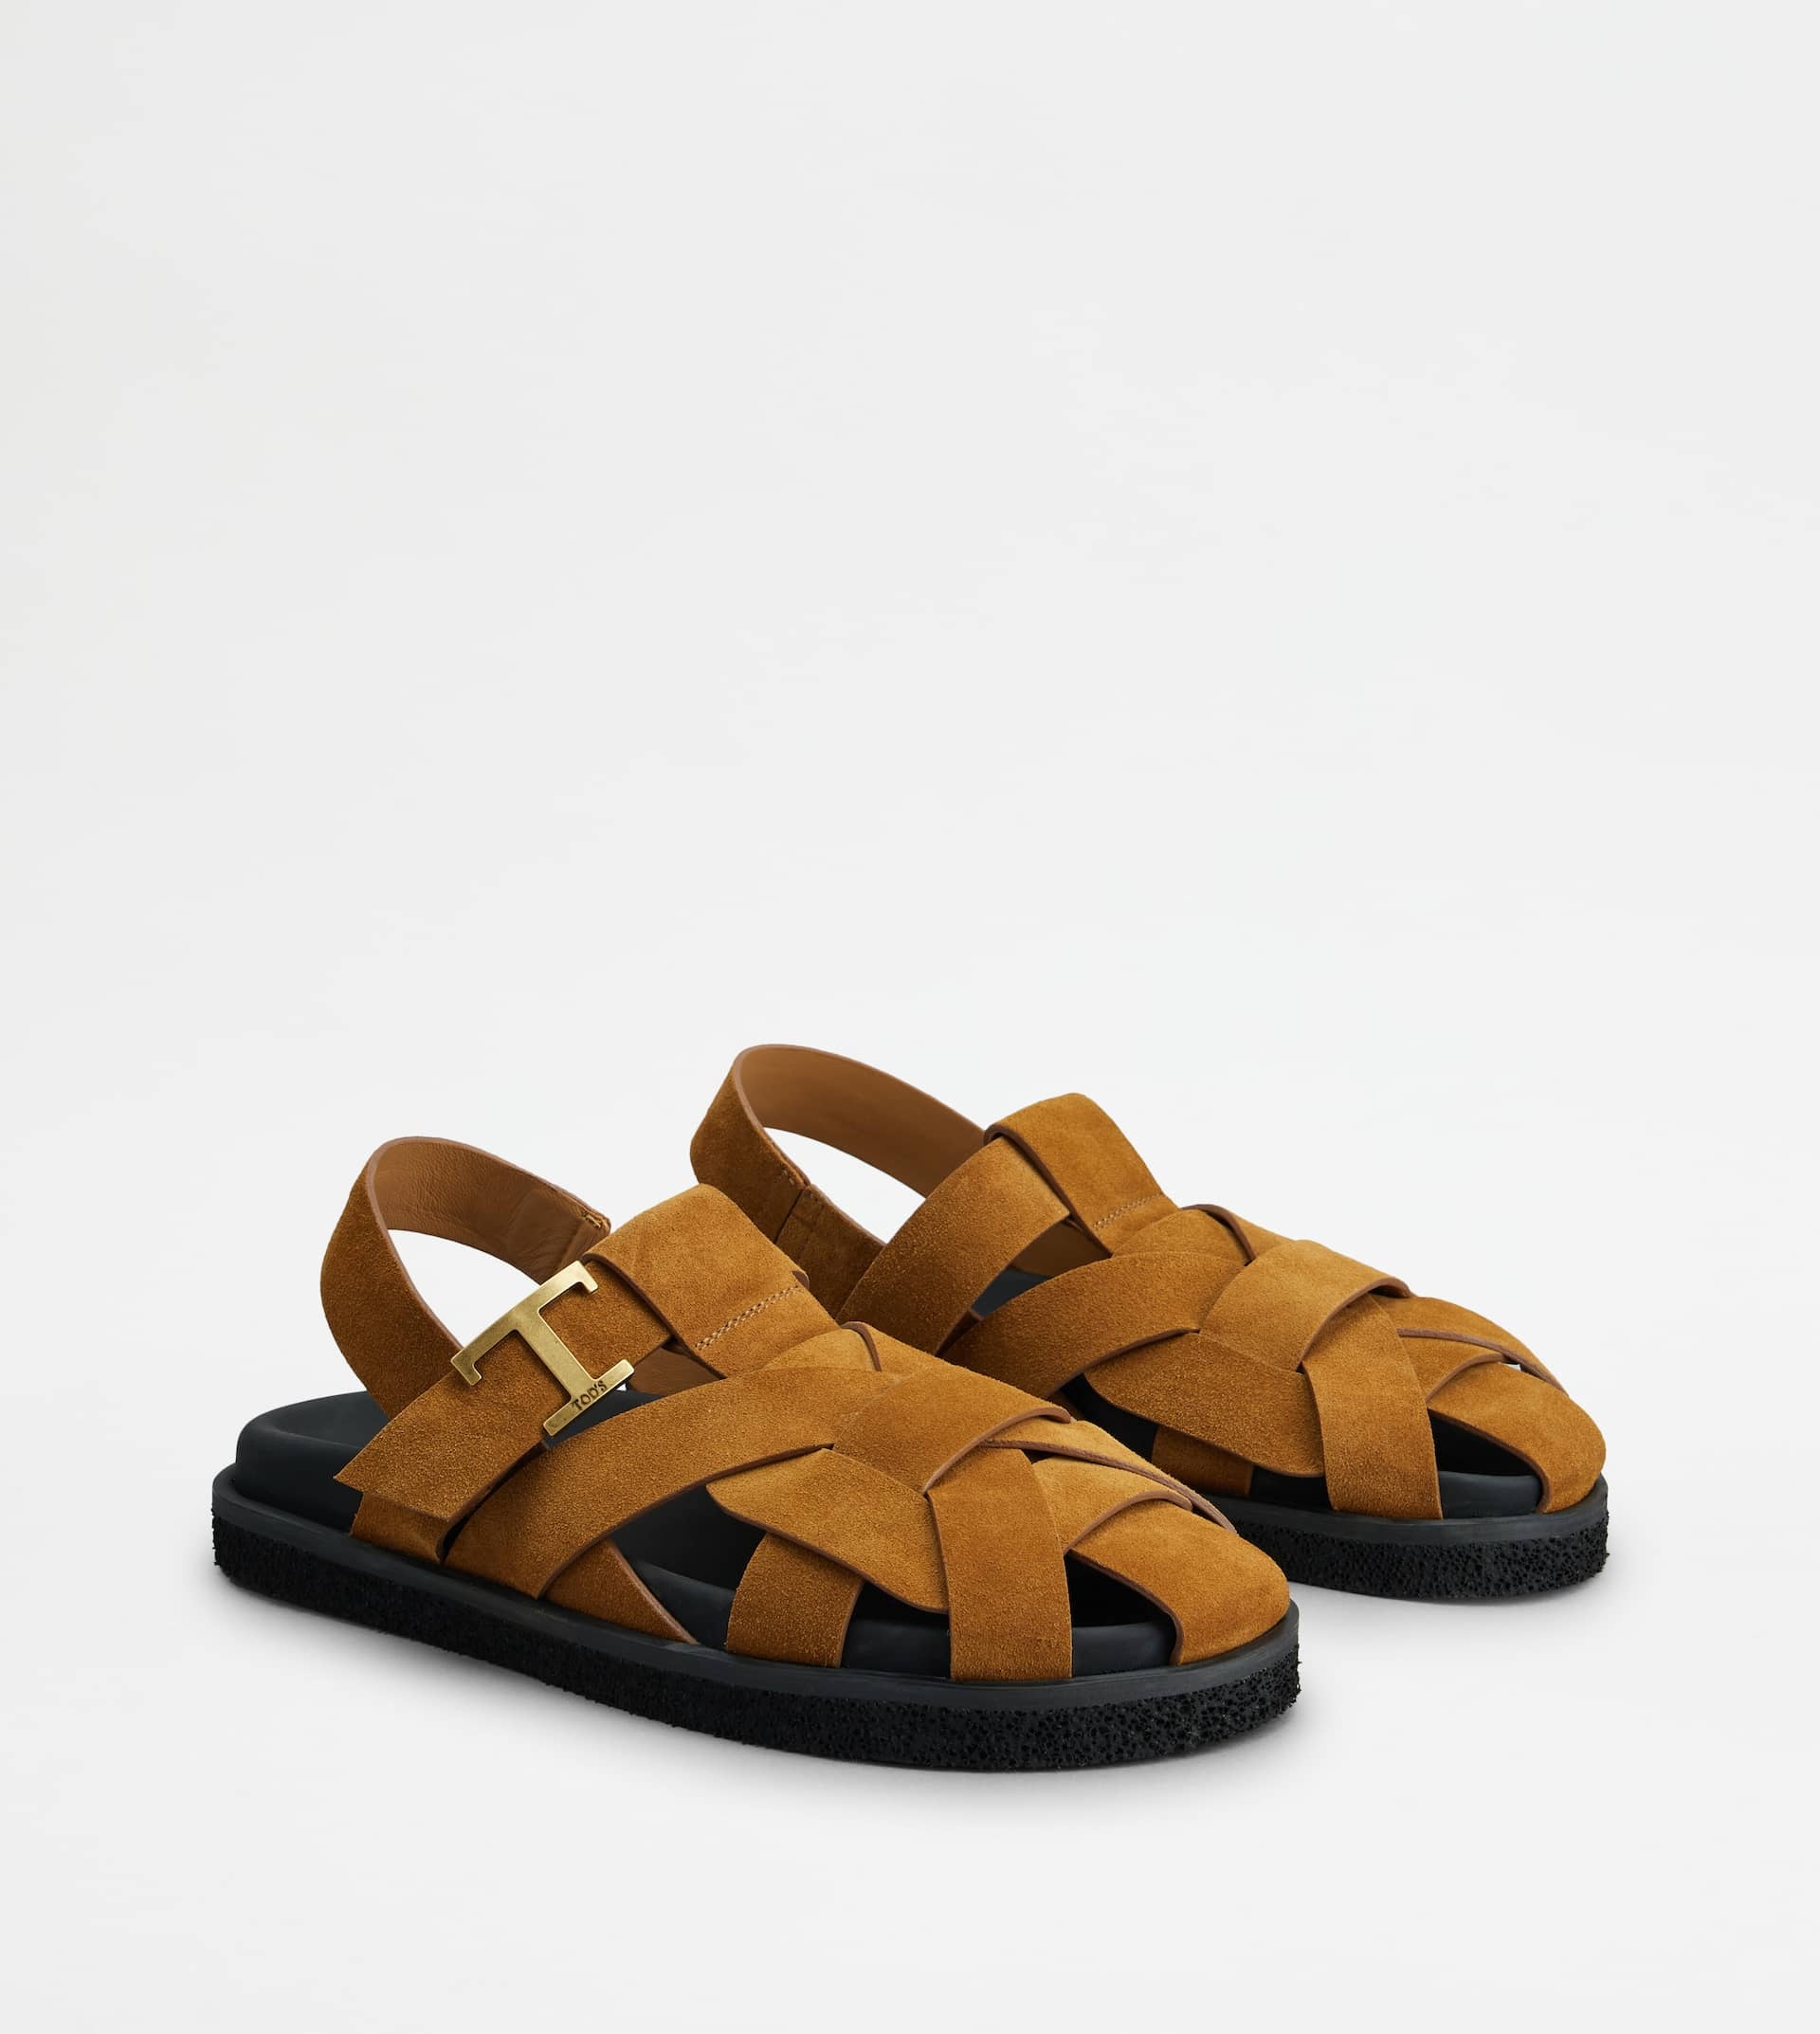 T TIMELESS SANDALS IN SUEDE - BROWN - 2